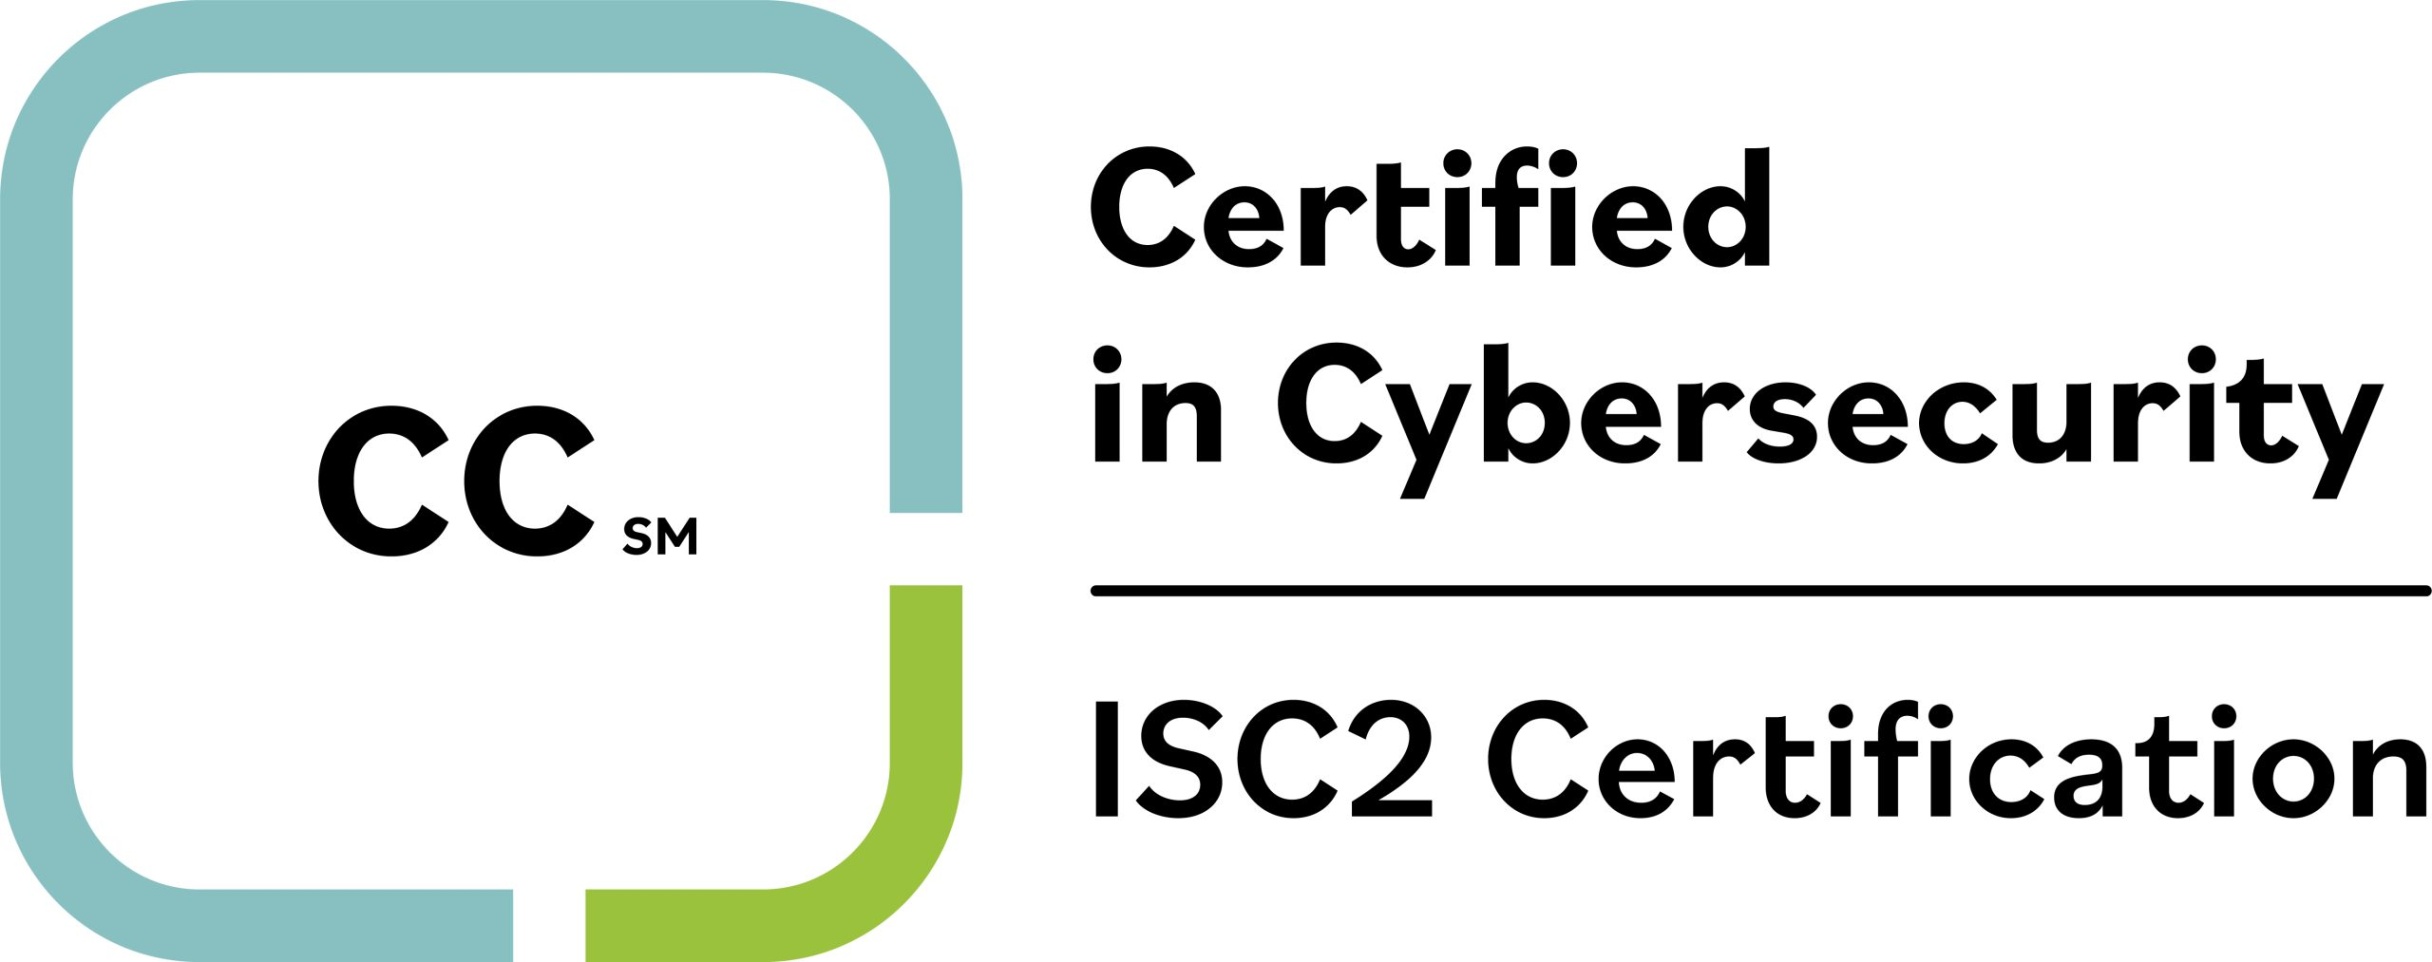 Become A Cybersecurity Pro: Get Certified With ISC2!